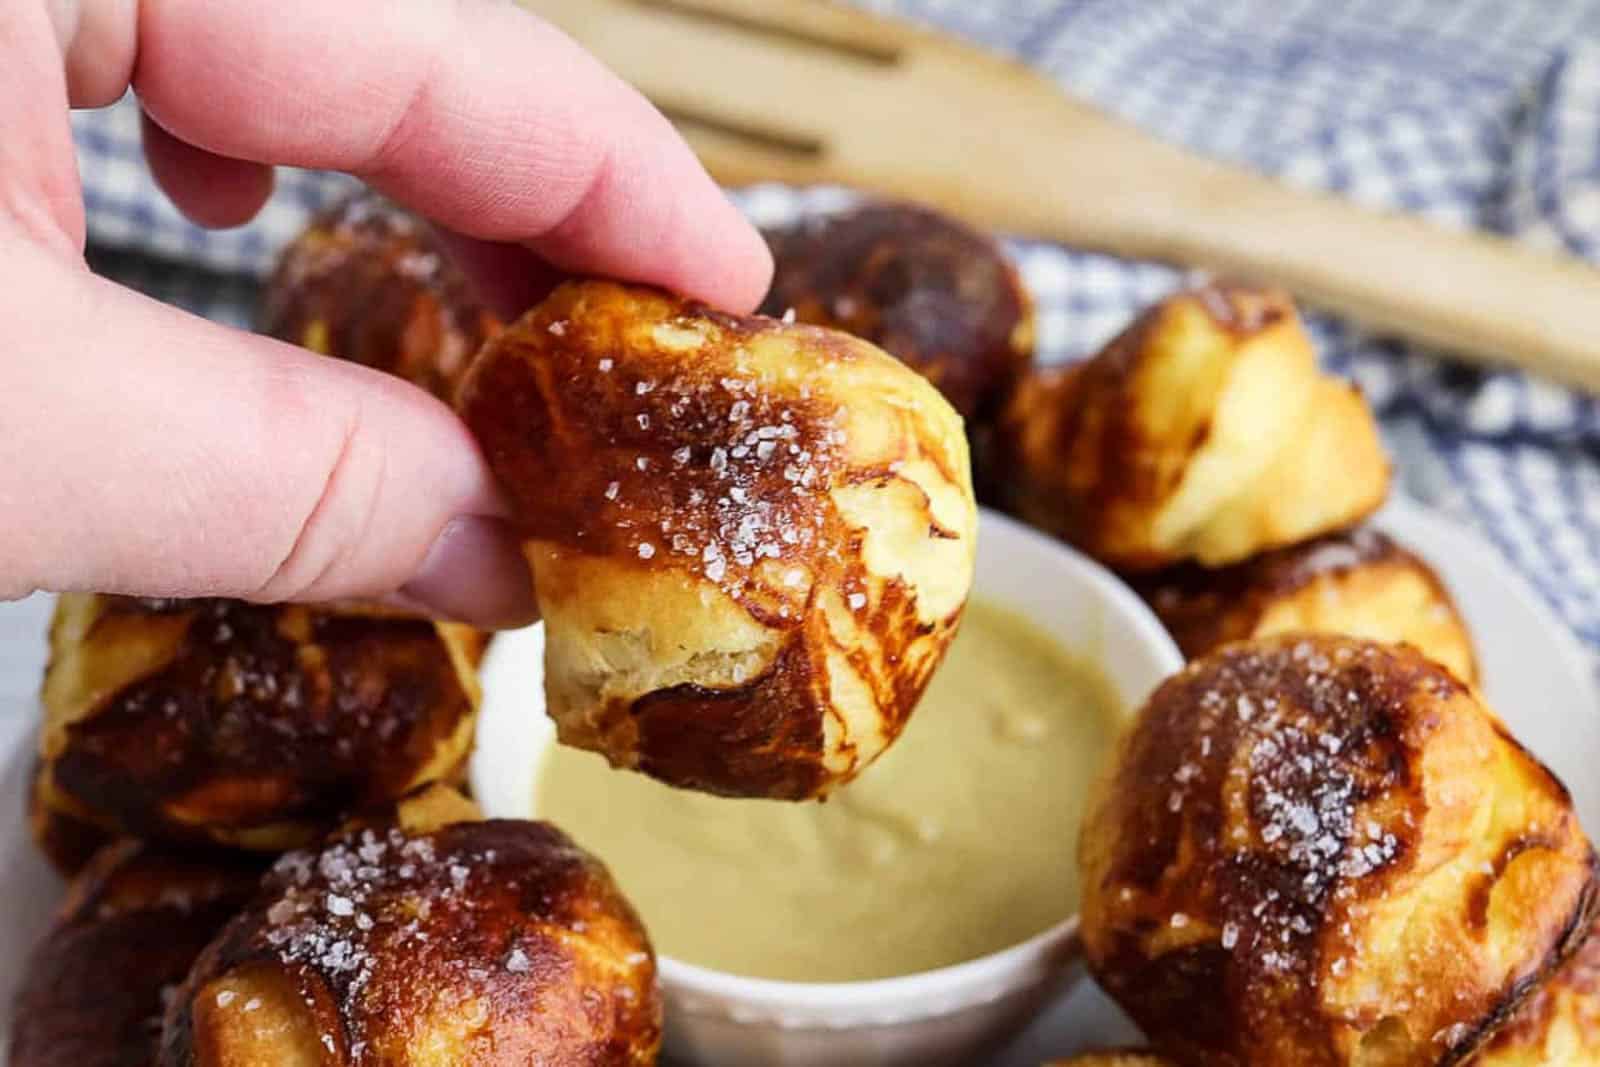 Hand holding a pretzel bite and dipping it into mustard.